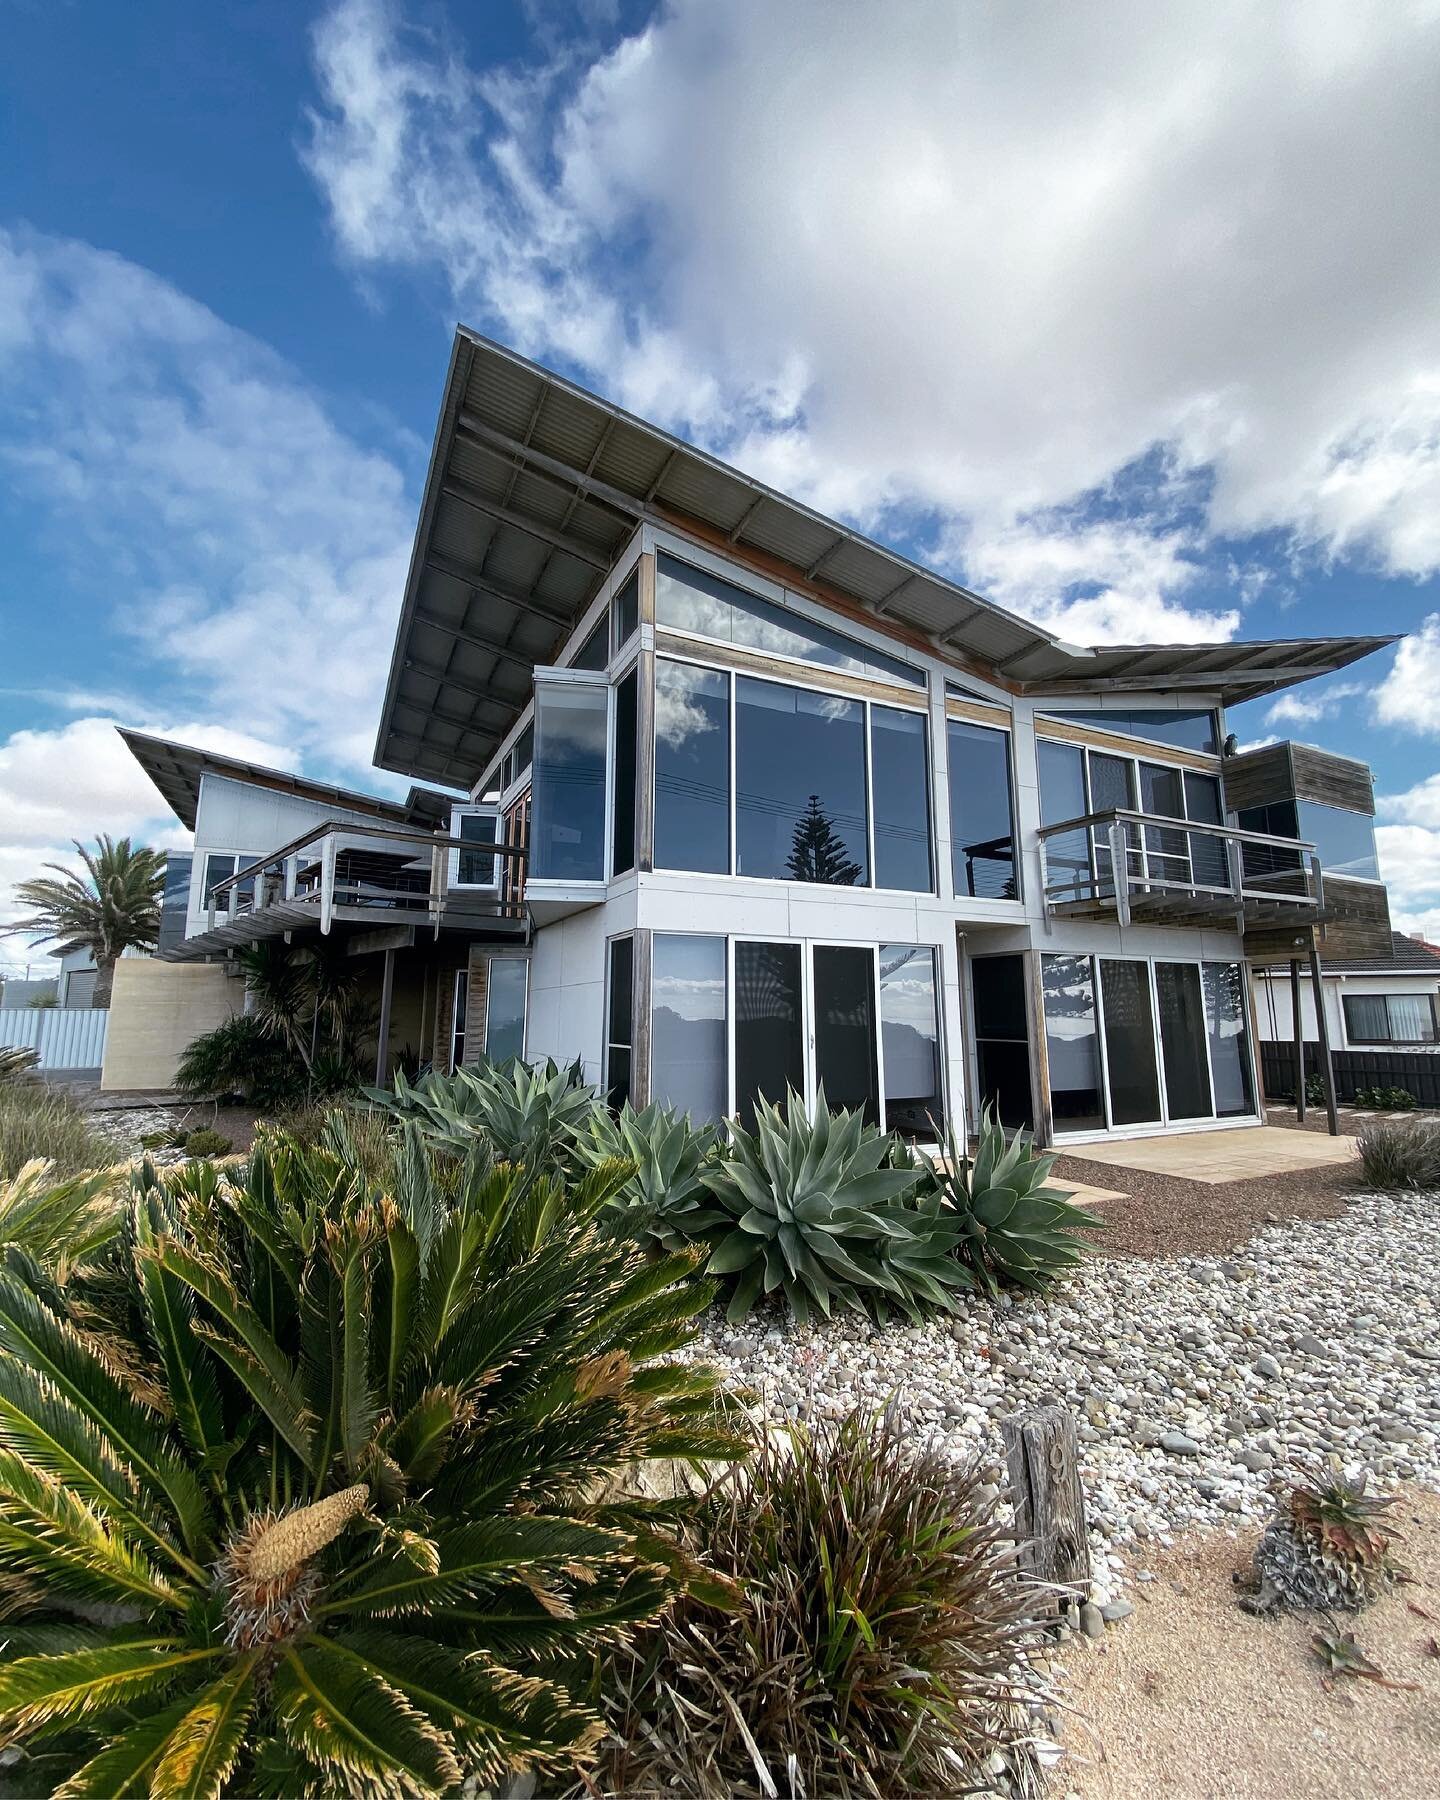 Overlooking the picturesque Tumby Bay

A holiday house for many with spaces for one and all

Complete with recycled jetty pylons, portholes, anchors and timber

Dry Esplanade House - Tumby Bay - 2008

#nobowtieshere #troppo #troppoarchitects #design 